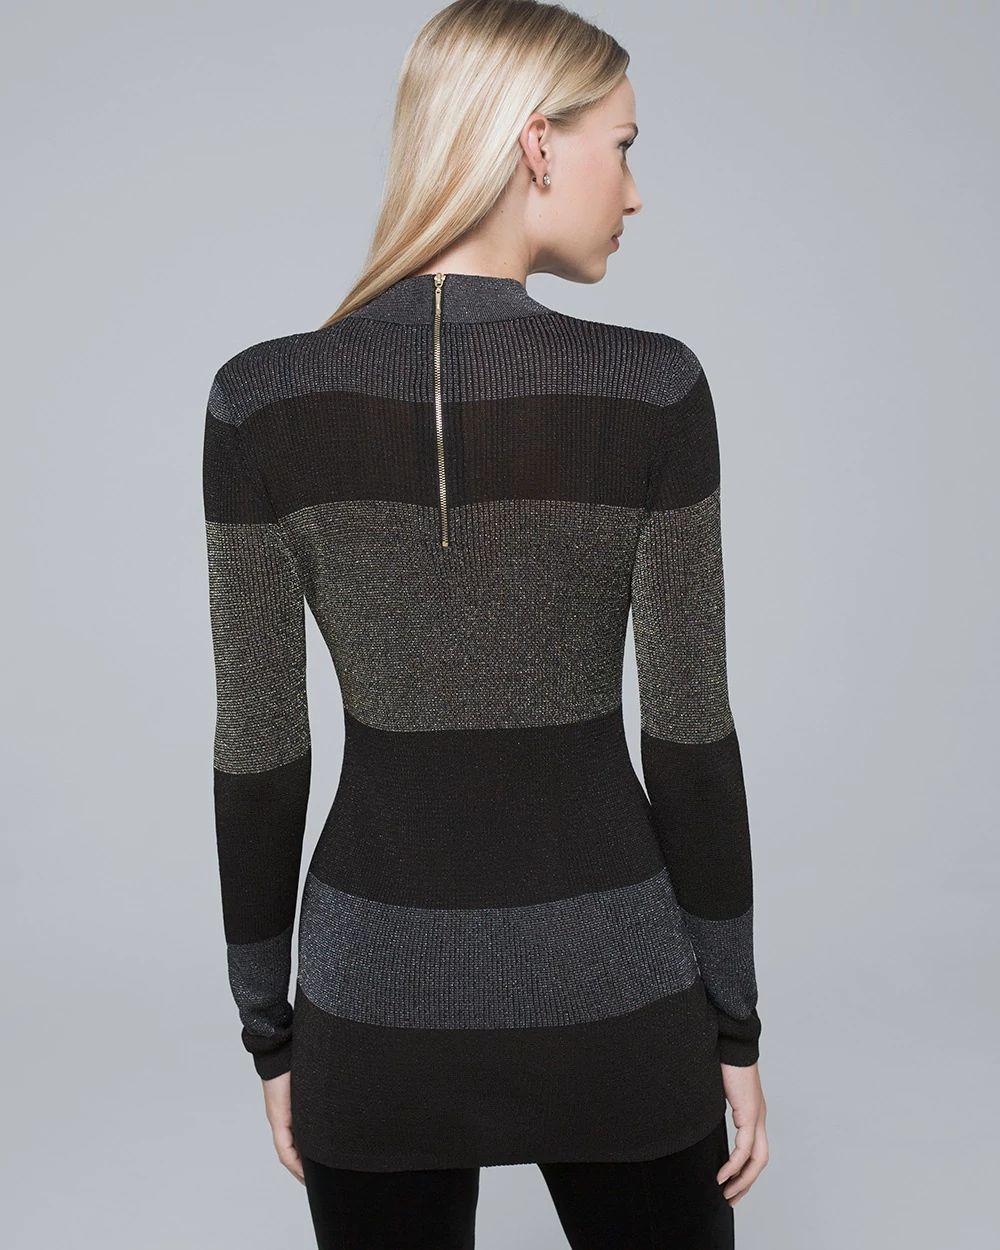 Metallic-Colorblock Sweater Tunic click to view larger image.